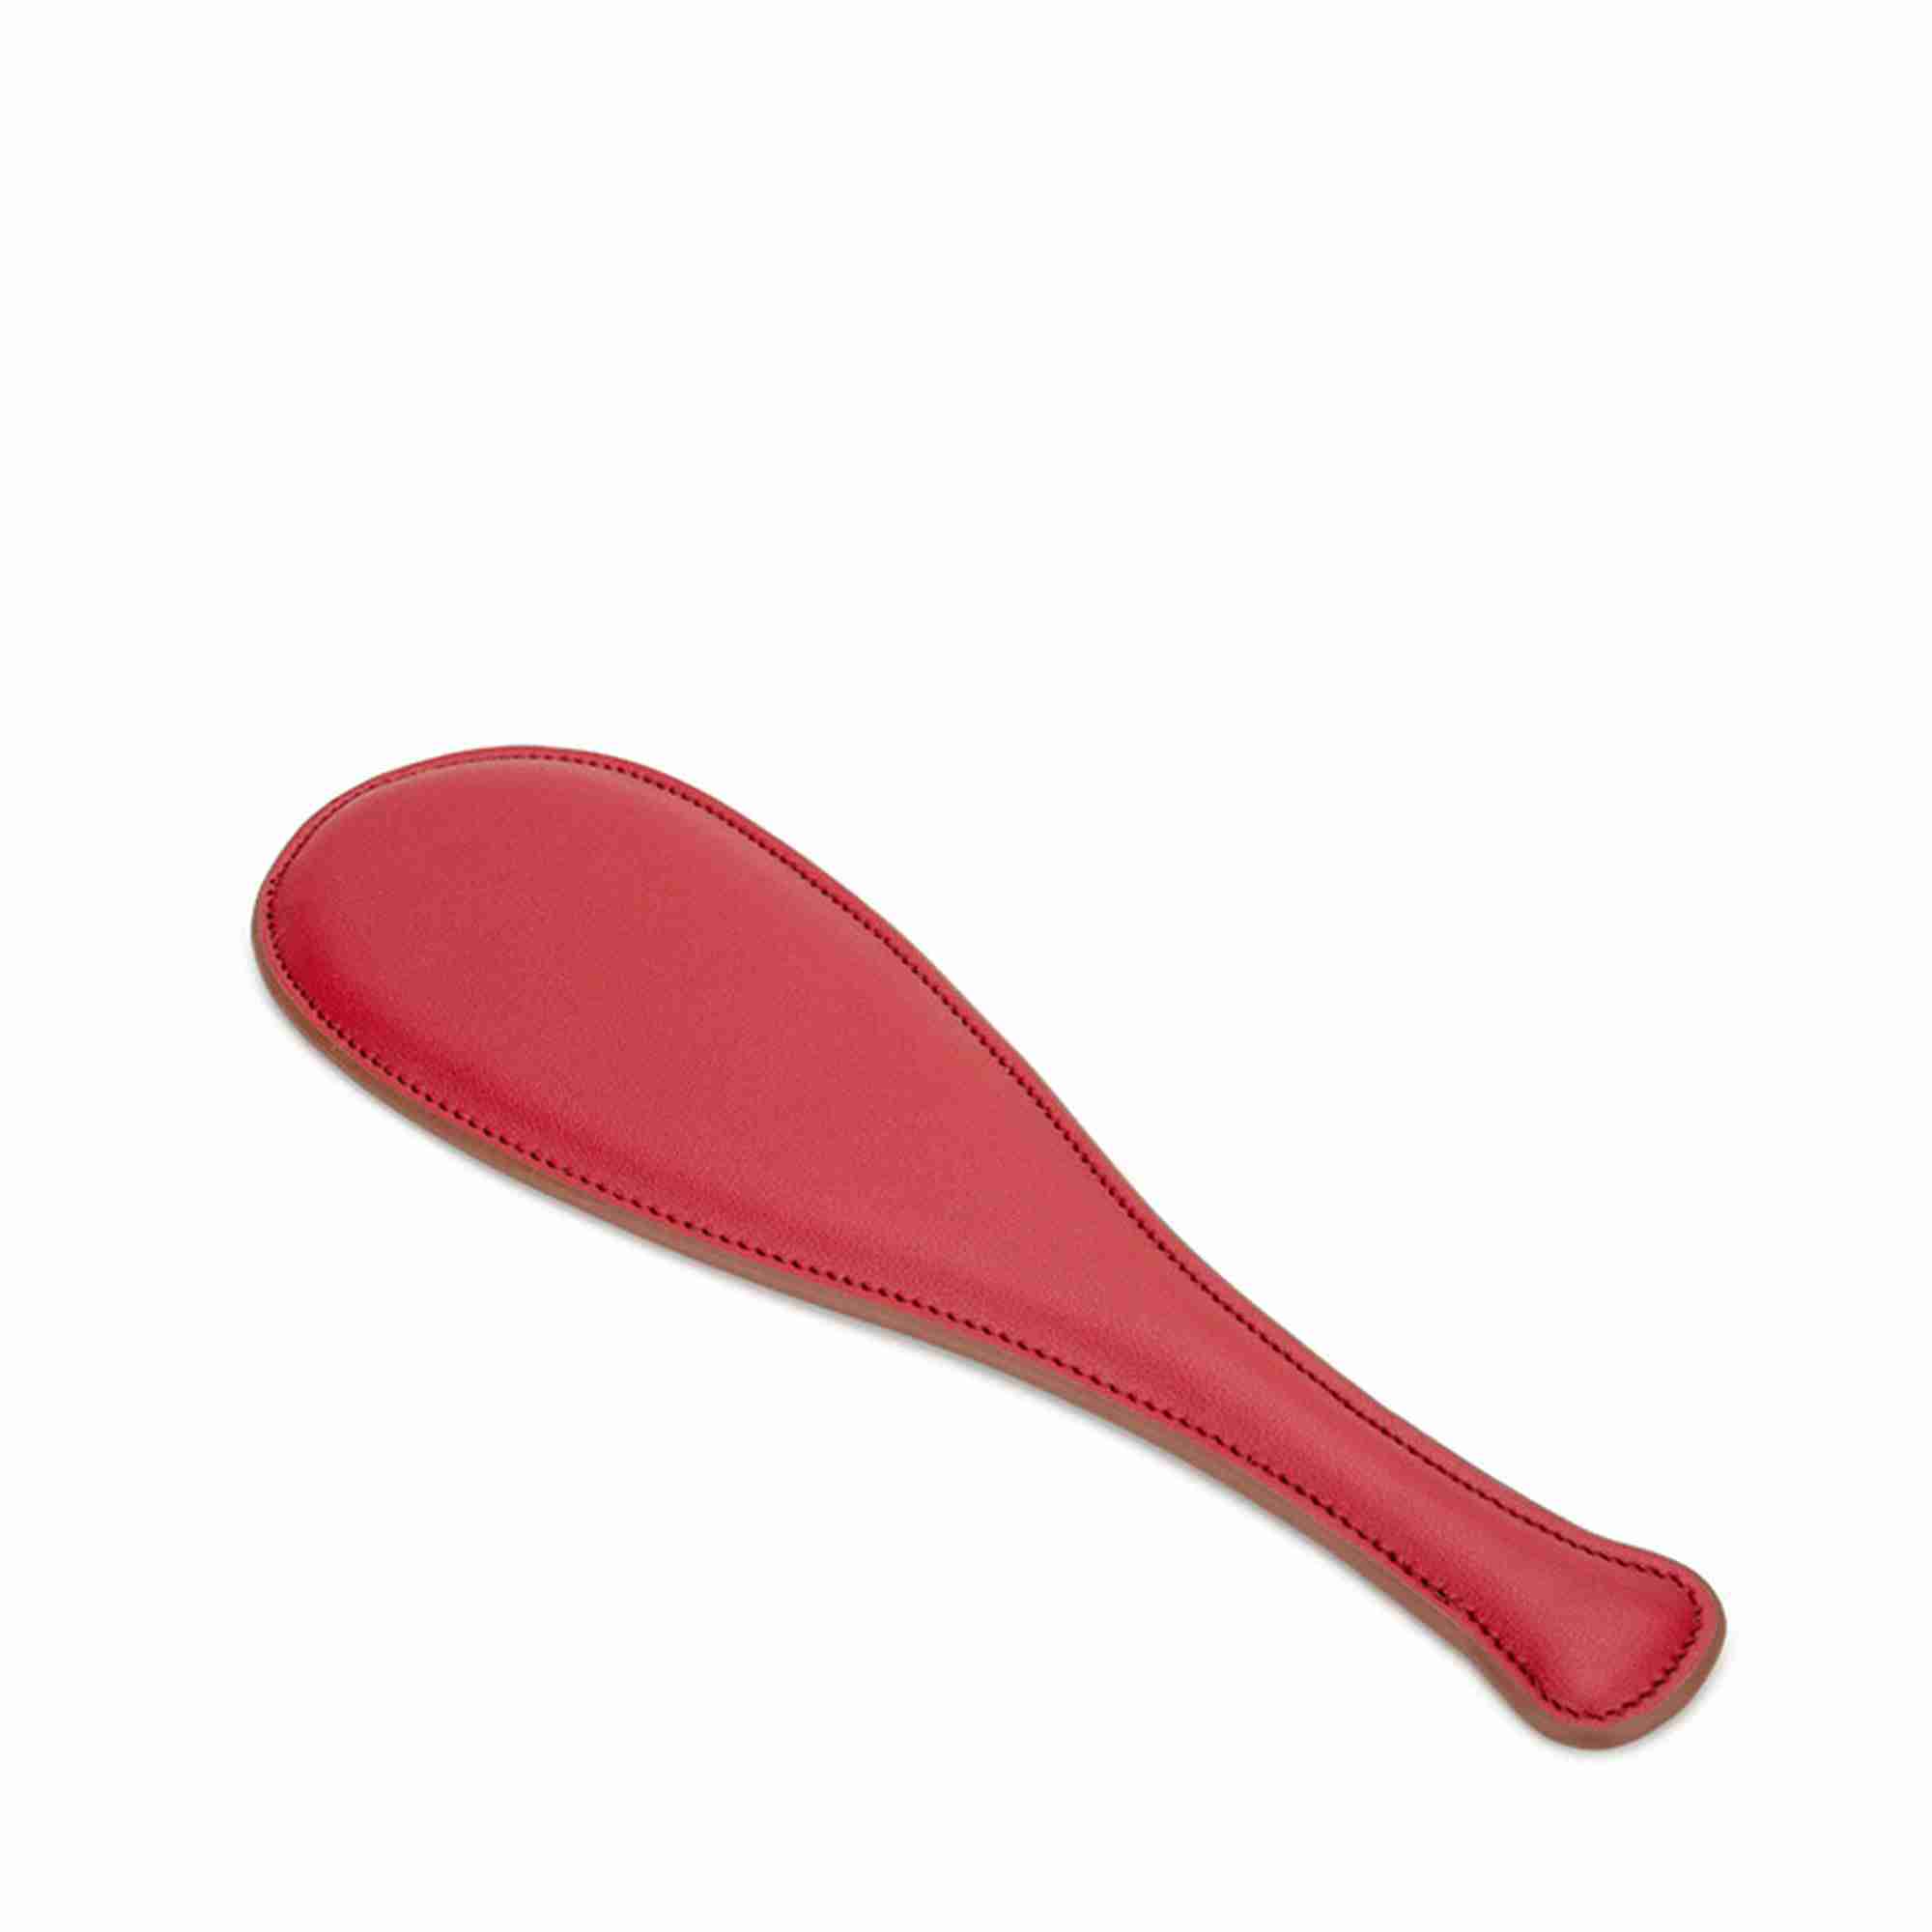 paddles with discount code